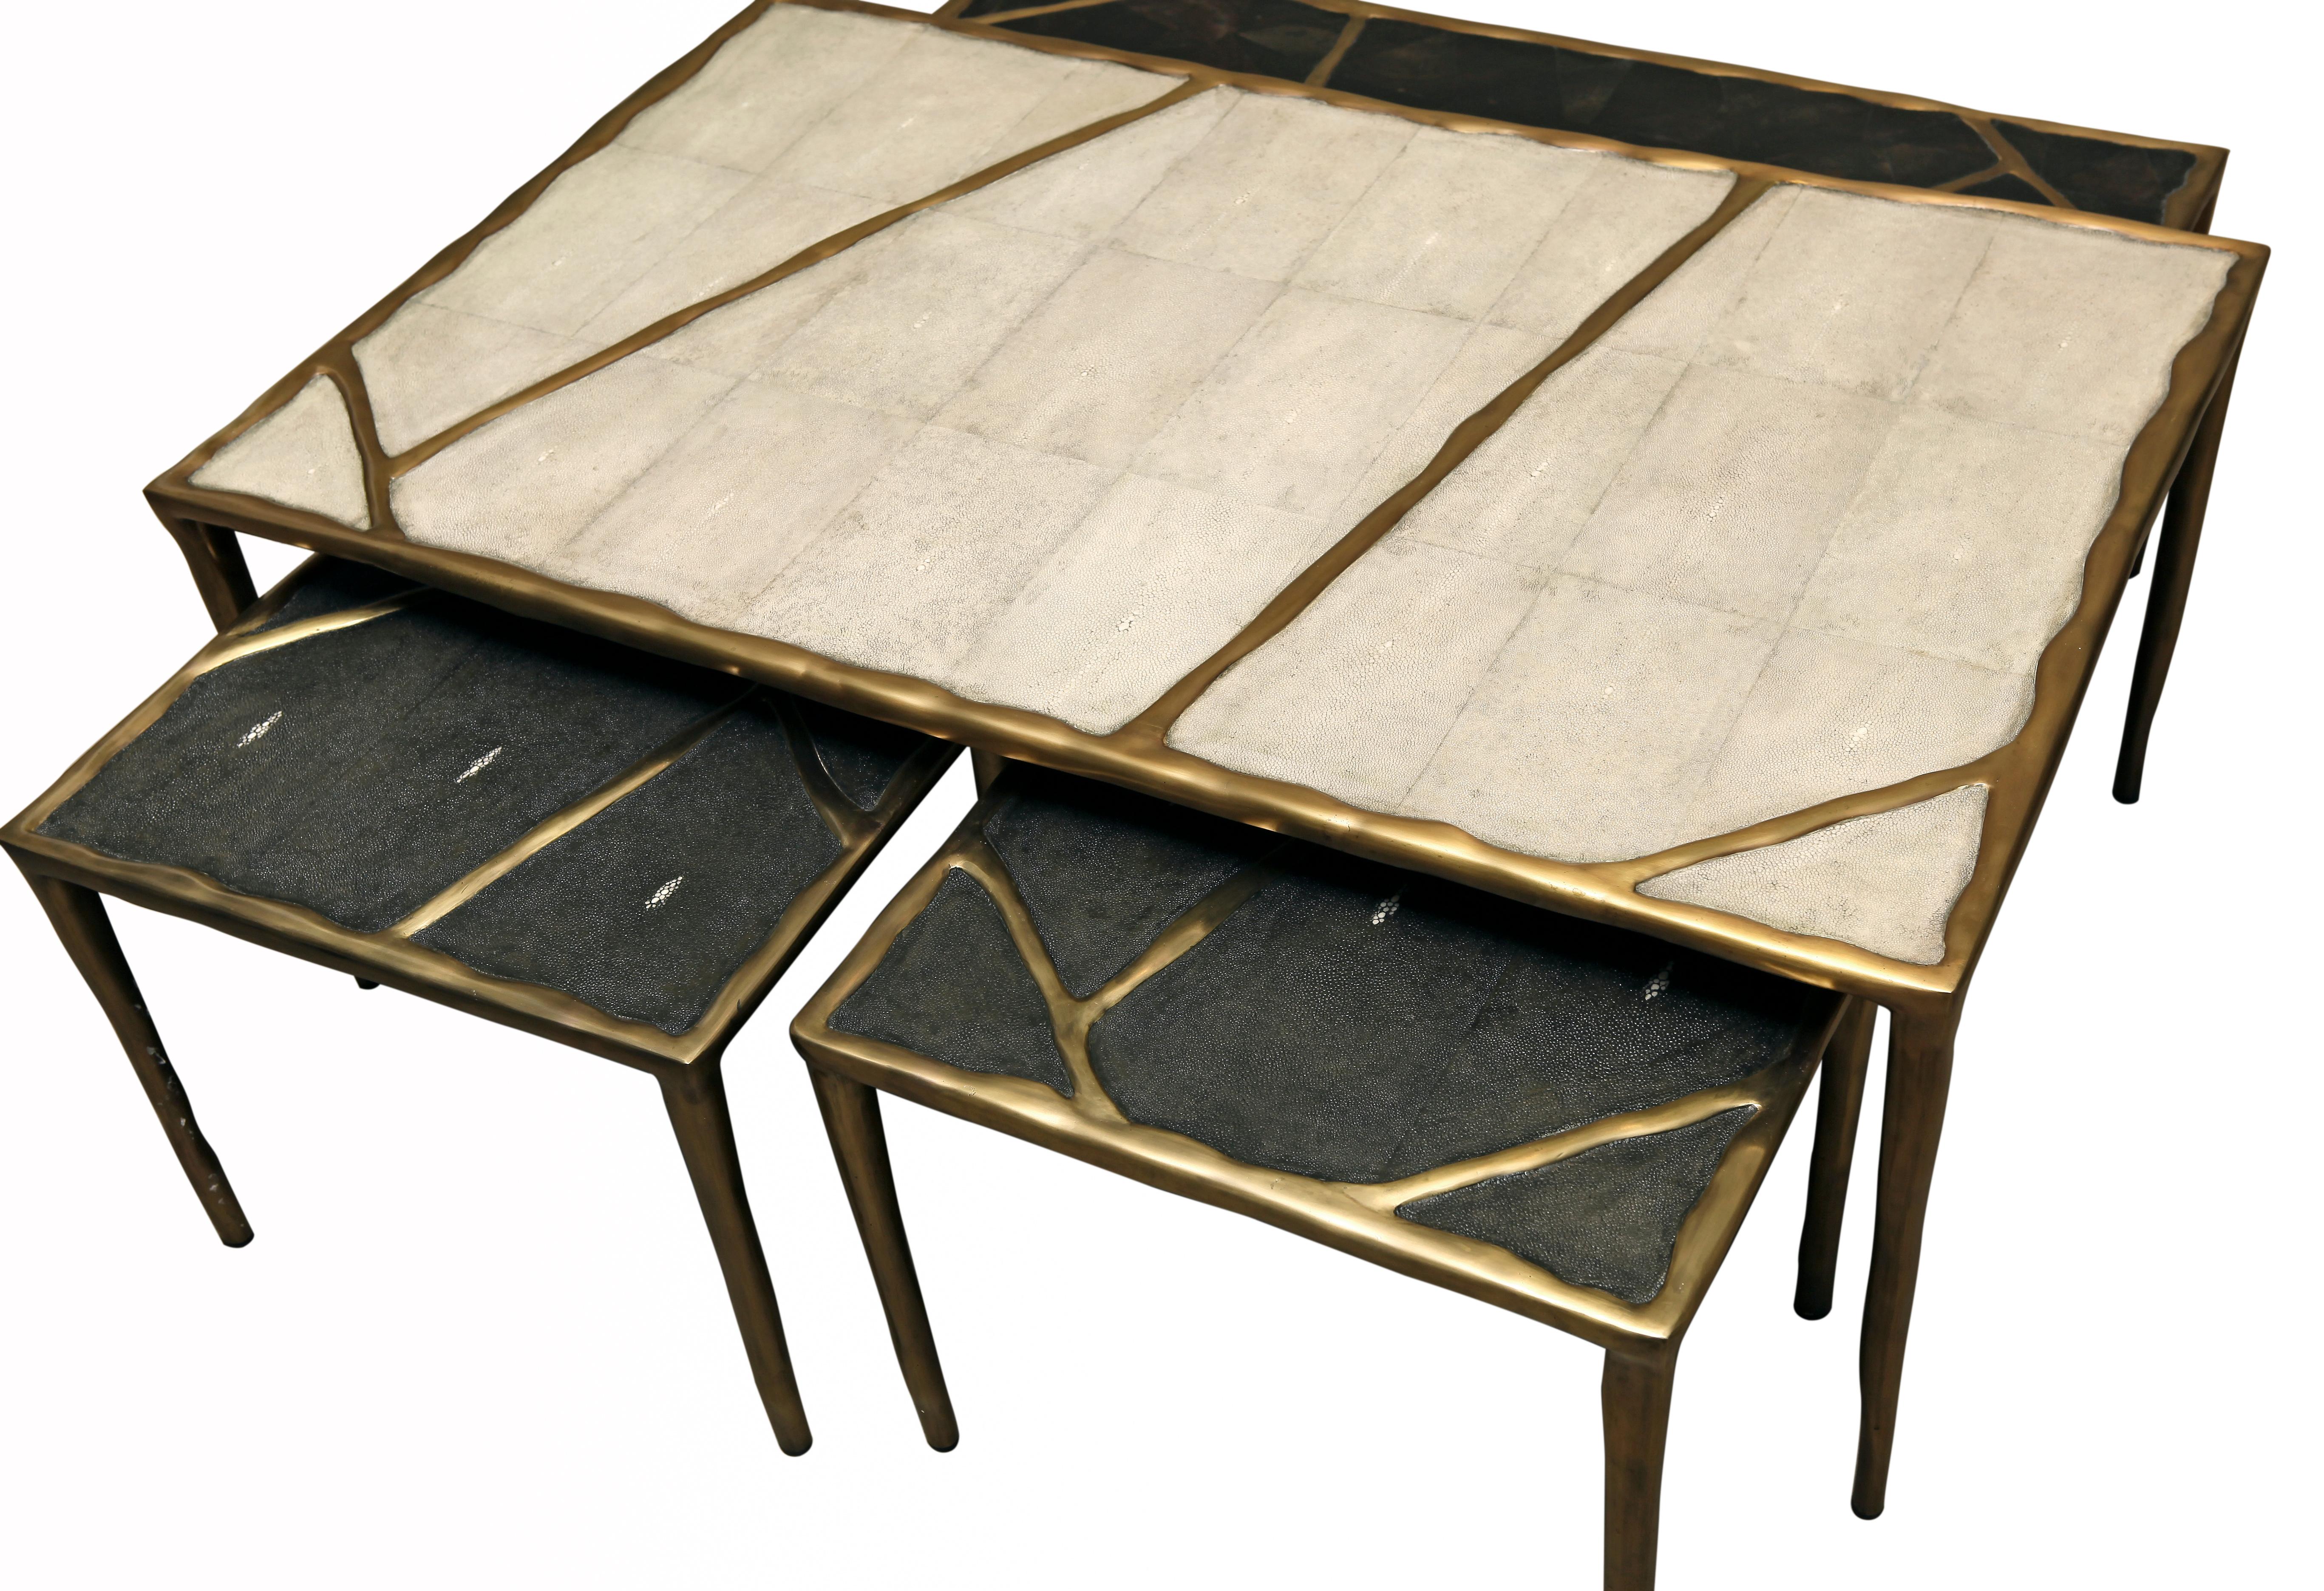 The melting nesting coffee tables are sold as a set of 4, the large is inlaid in cream shagreen, the medium in black pen shell, and the two small sizes in black shagreen. These pieces have a bronze-patina brass pattern that 